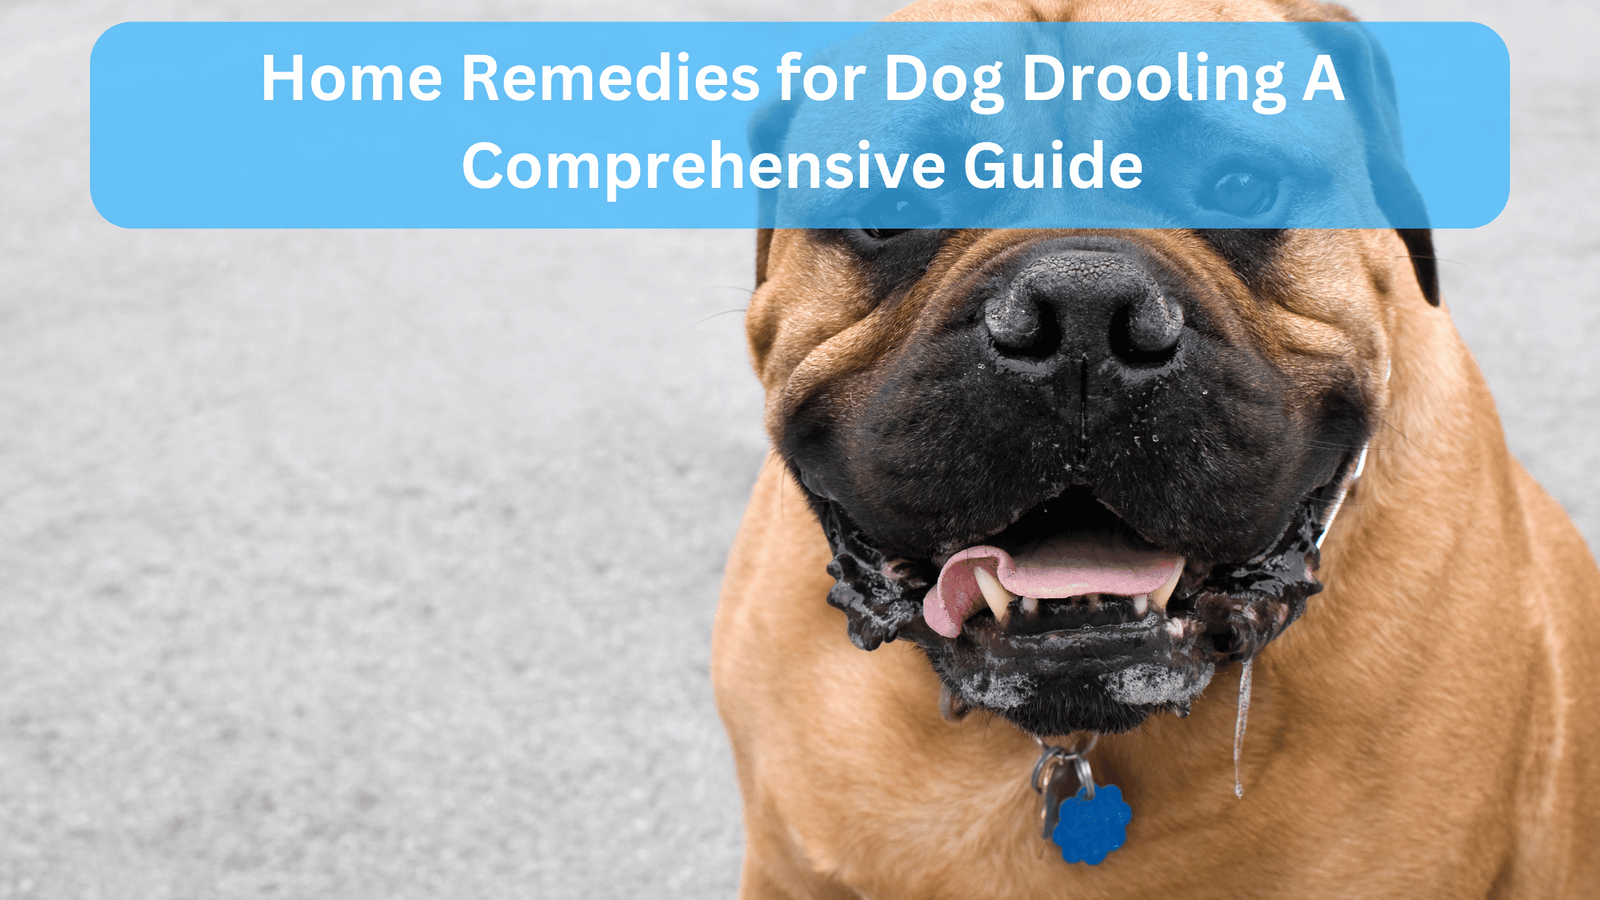 Home Remedies for Dog Drooling